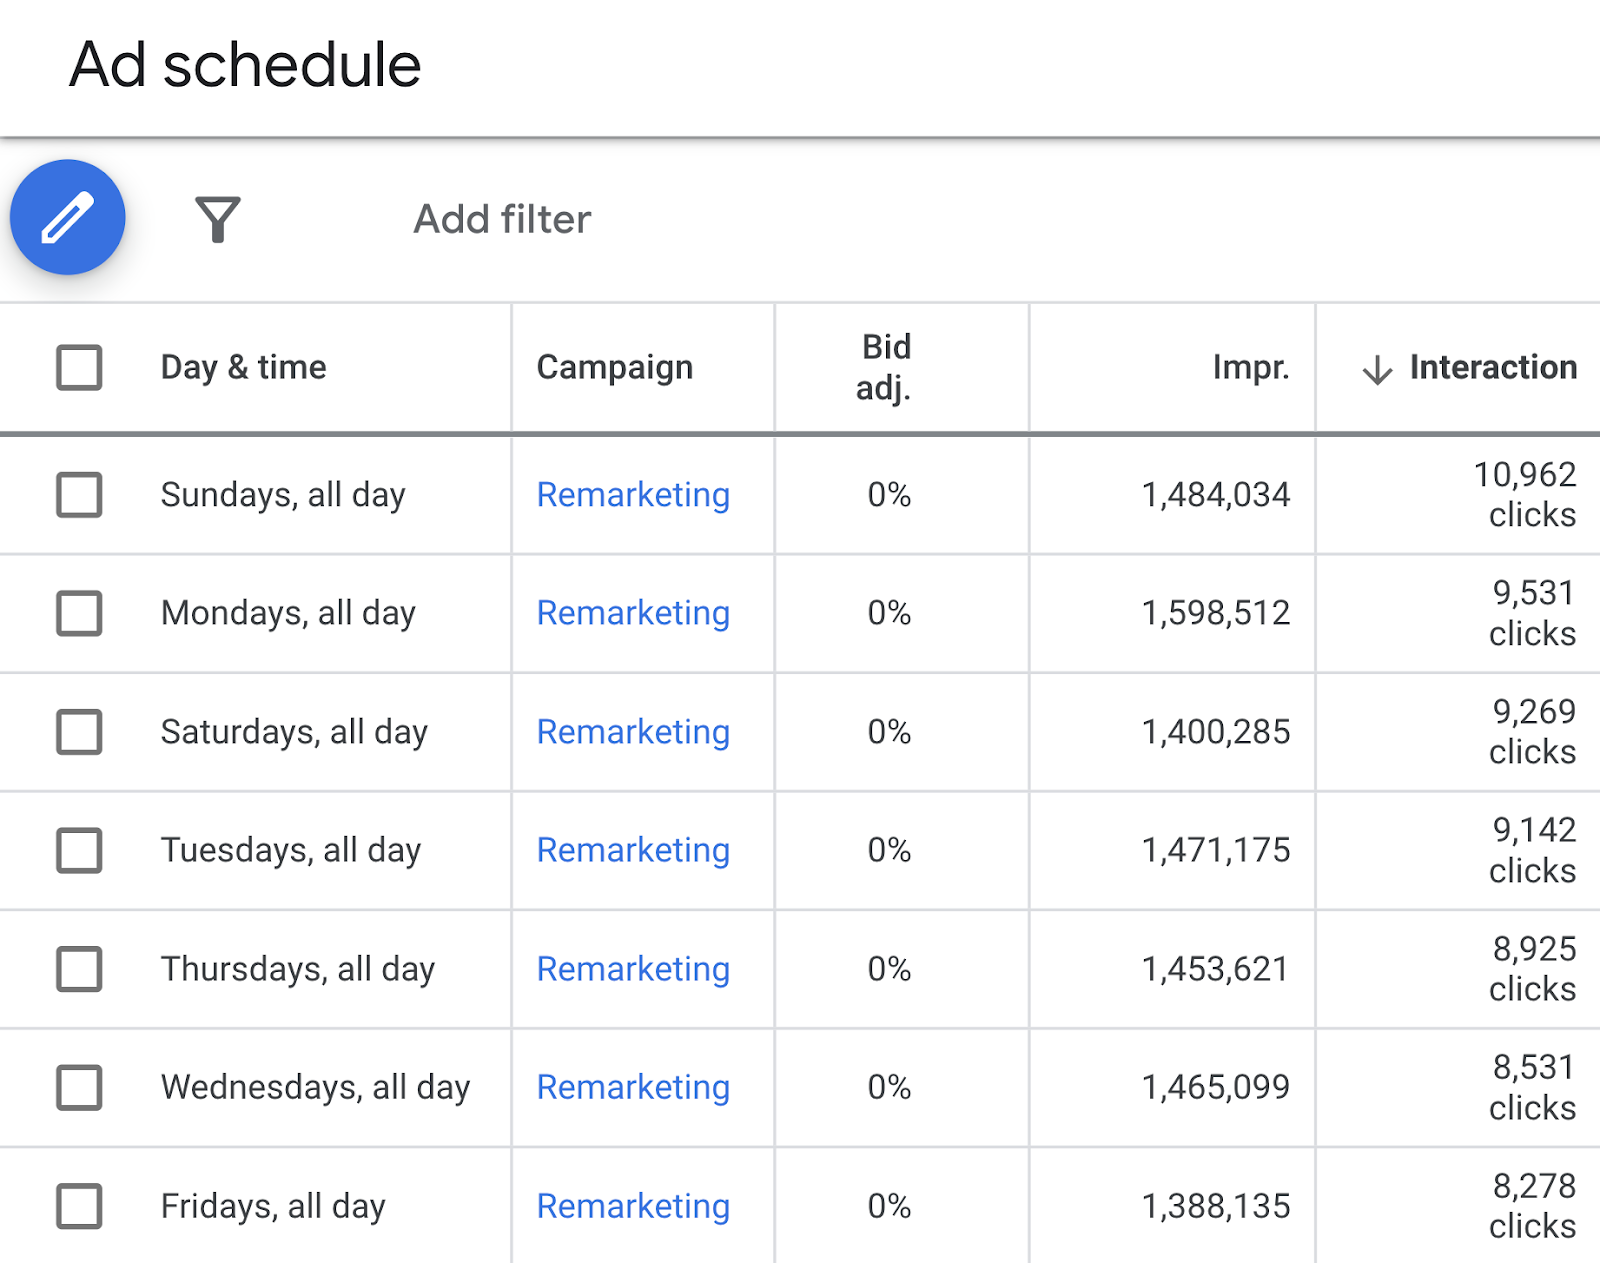 “Ad schedule” page helps you know which days and times are getting the best results